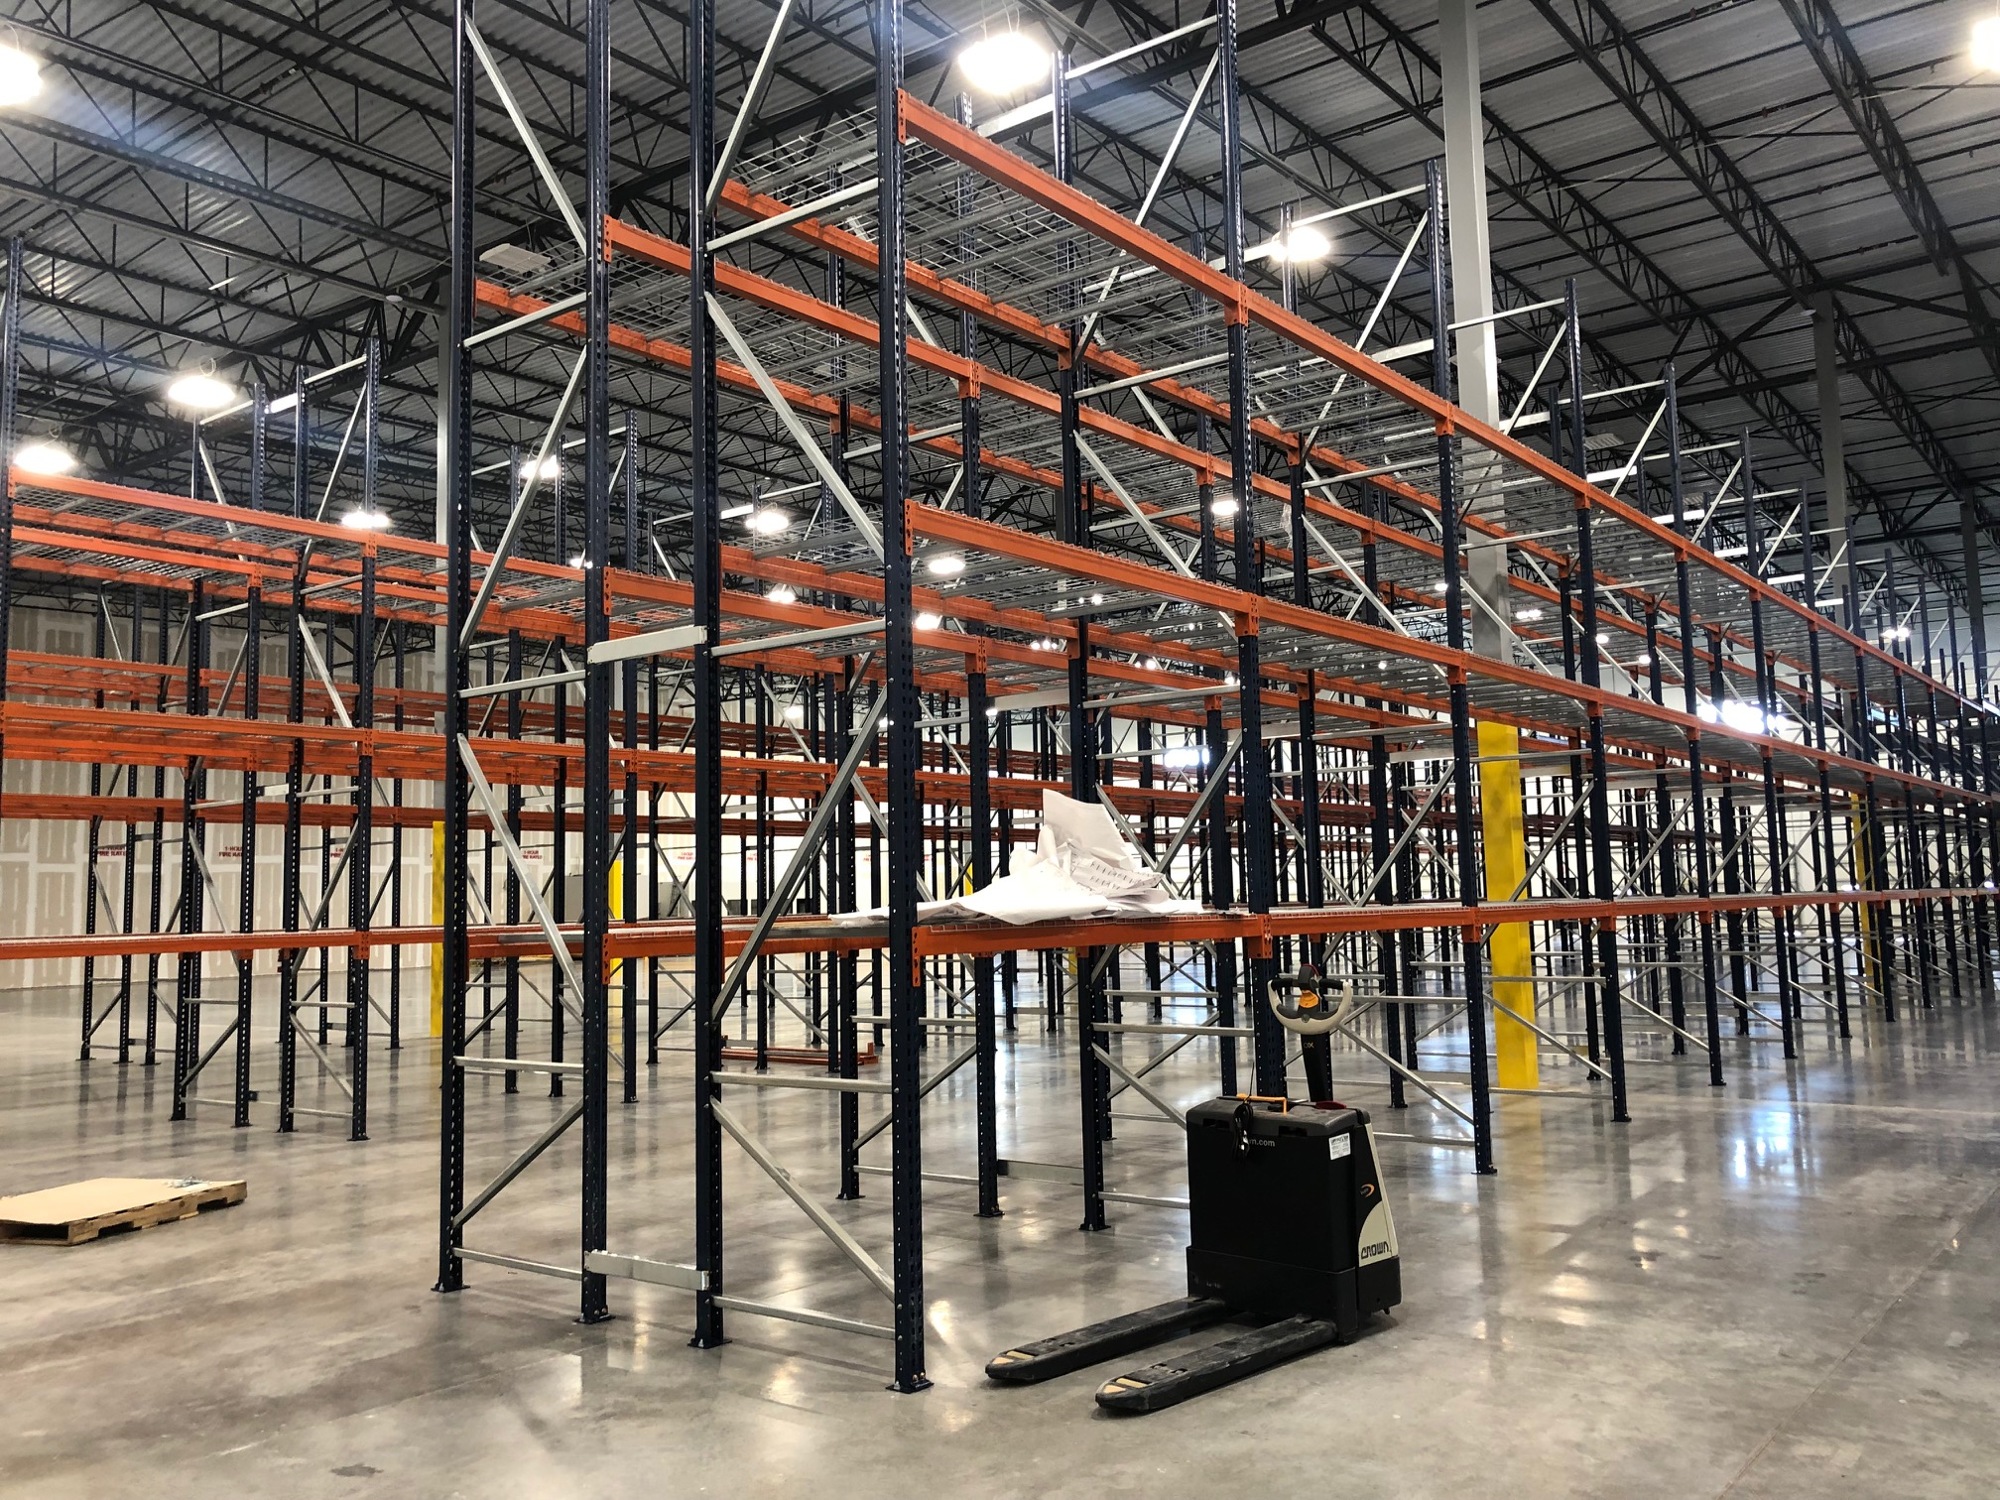 The racks inside the 40,000-square-foot ArdentX warehouse can hold 75 full truckloads.